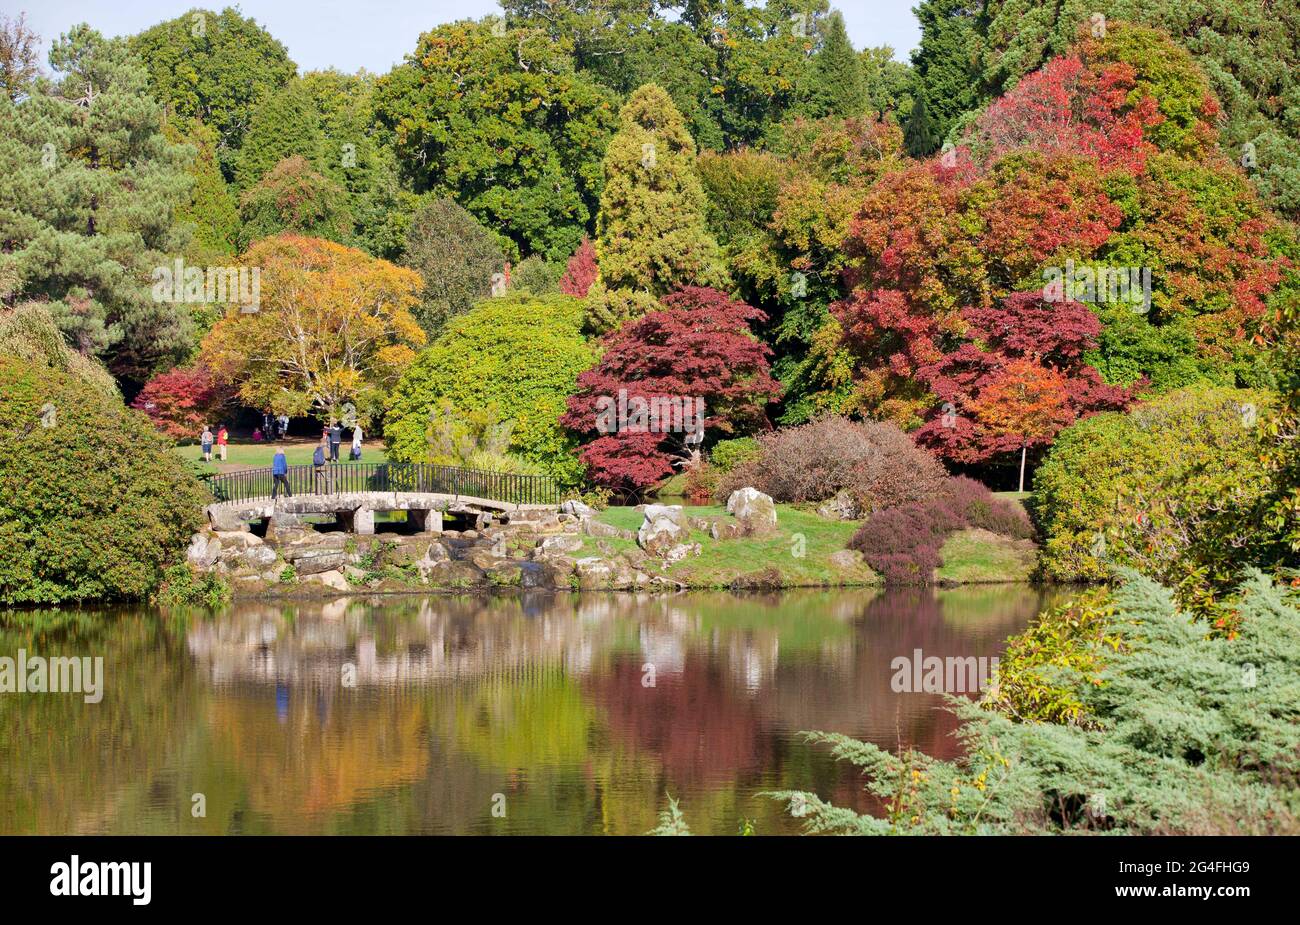 Visitors enjoy the glorious autumnal beauty on display at Sheffield Park and Gardens in East Sussex, England, October 2020.  Famous for its autumn col Stock Photo